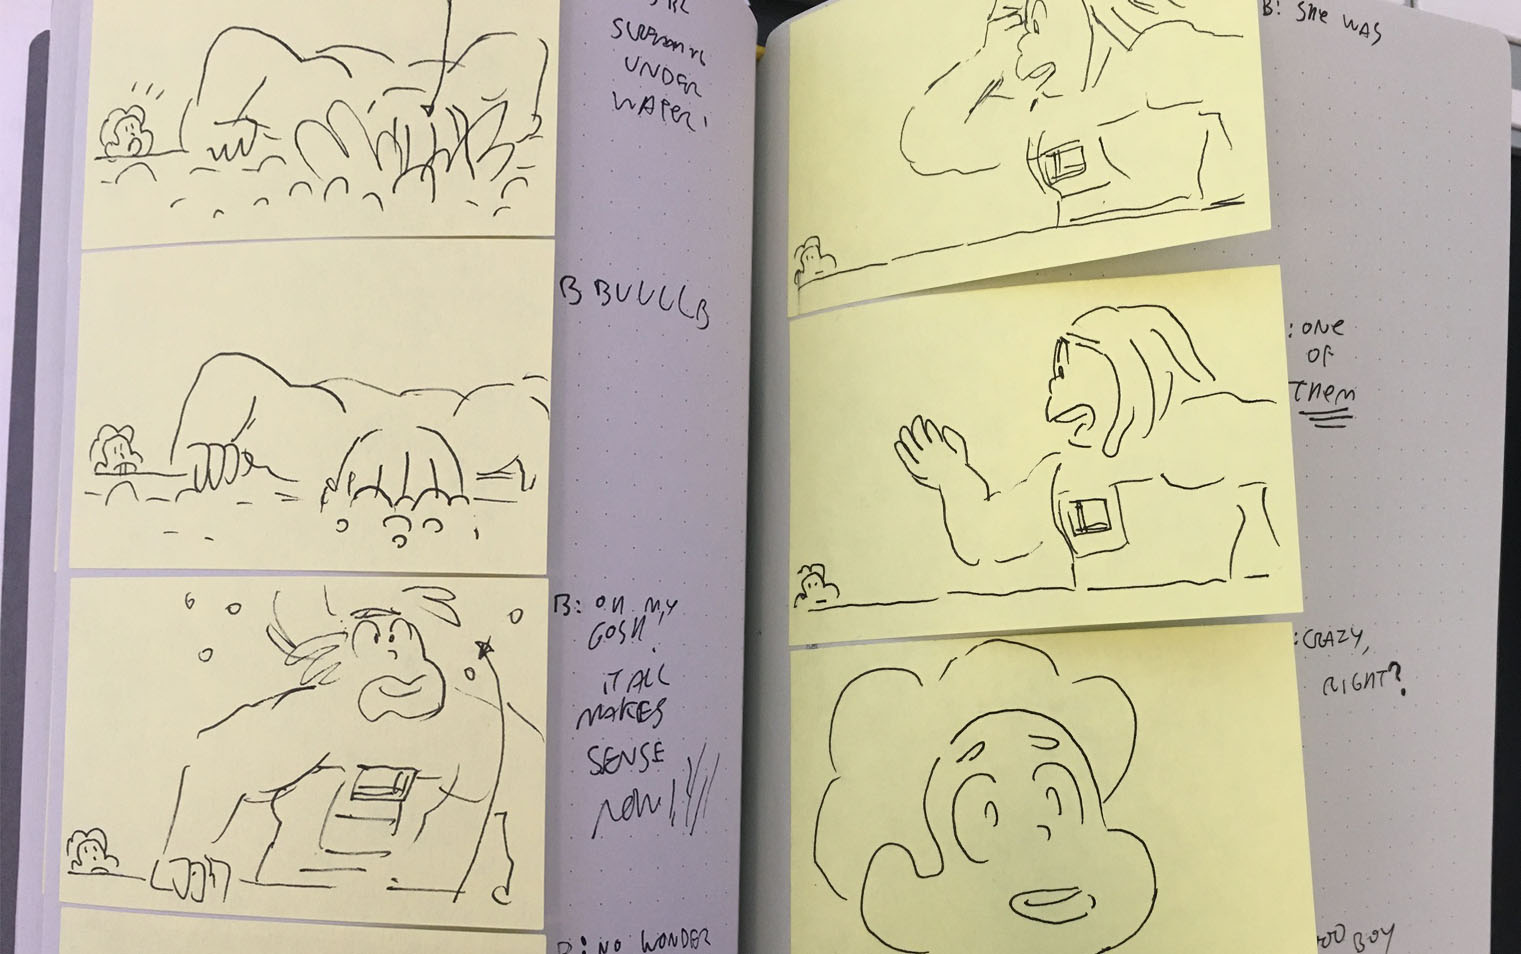 Sketches for Steven Universe. Credit: Cartoon Network